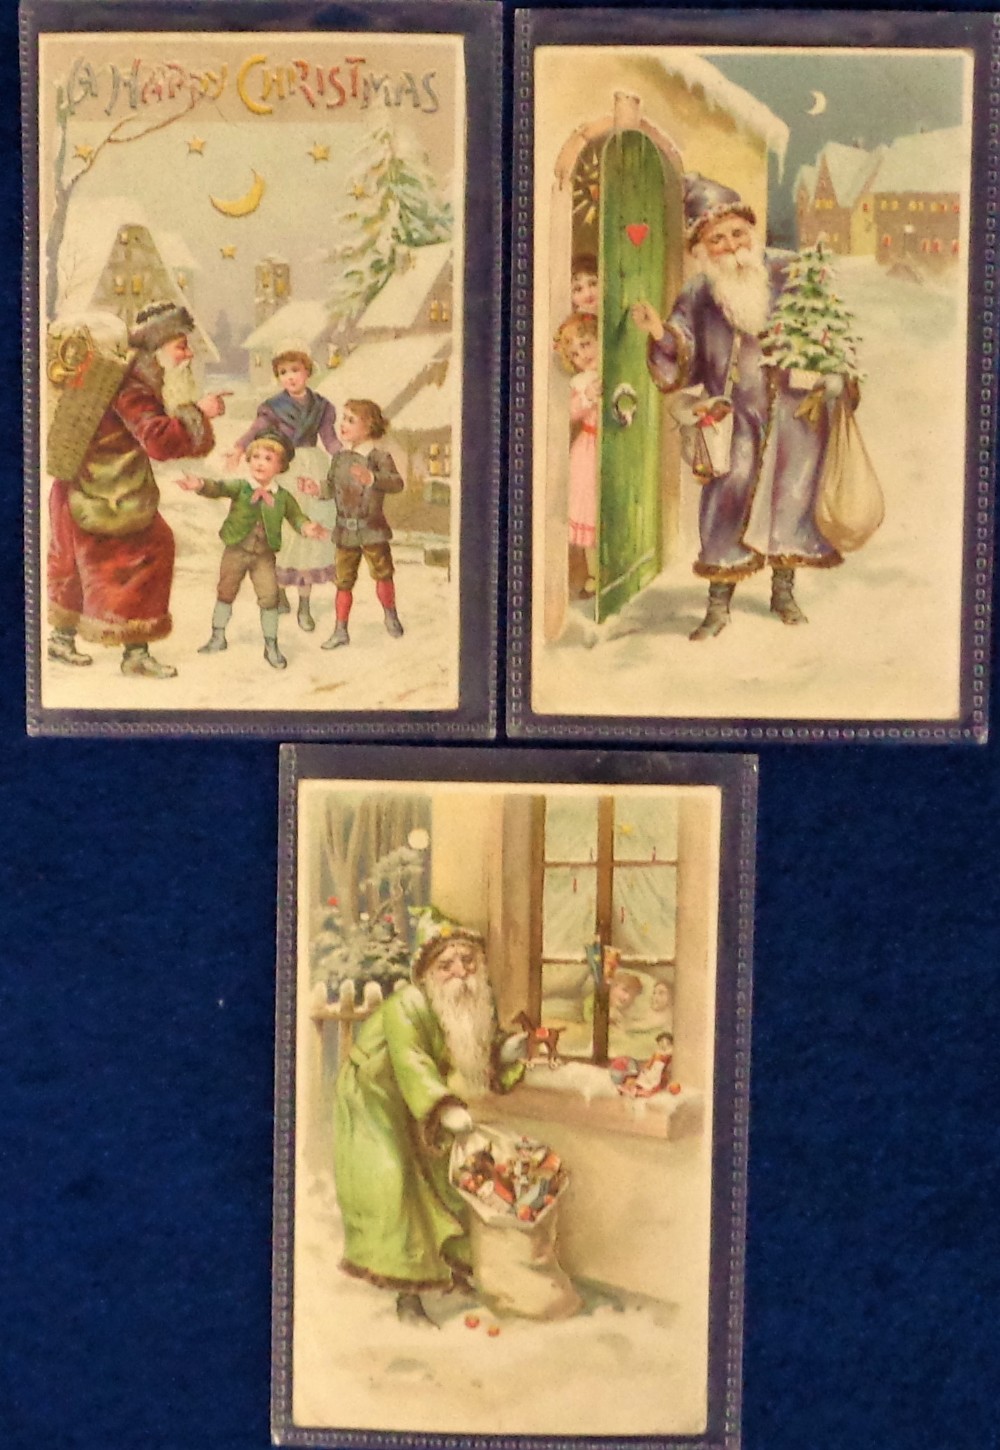 Postcards, H.T.L, a selection of 3 Santa HTL cards. Santa with green, red and blue robes. All with